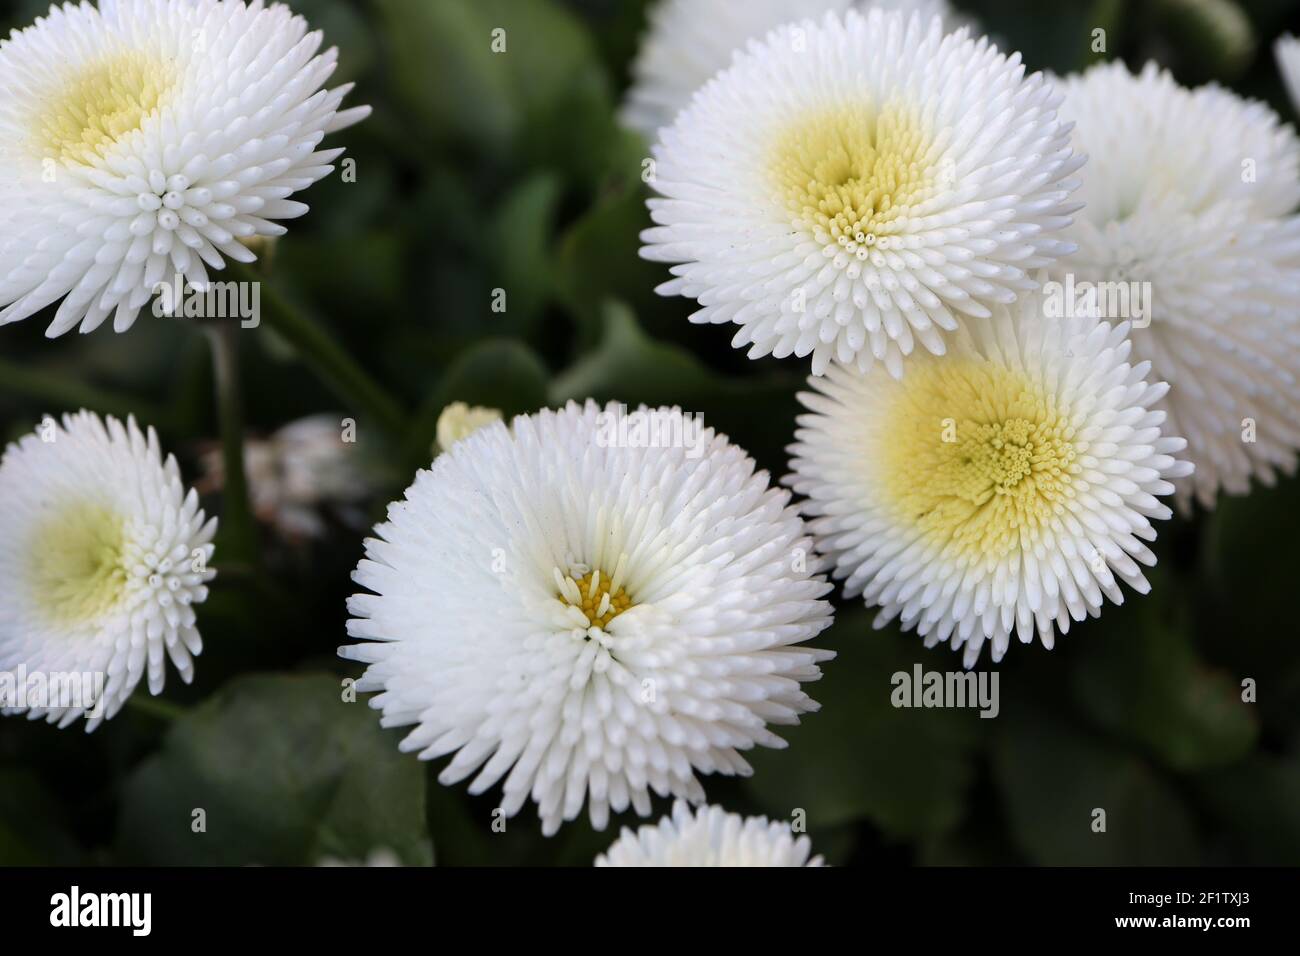 Bellis perennis 'Bellissima White’ white Bellis – white flowers with tightly quilled petals, March, England, UK Stock Photo